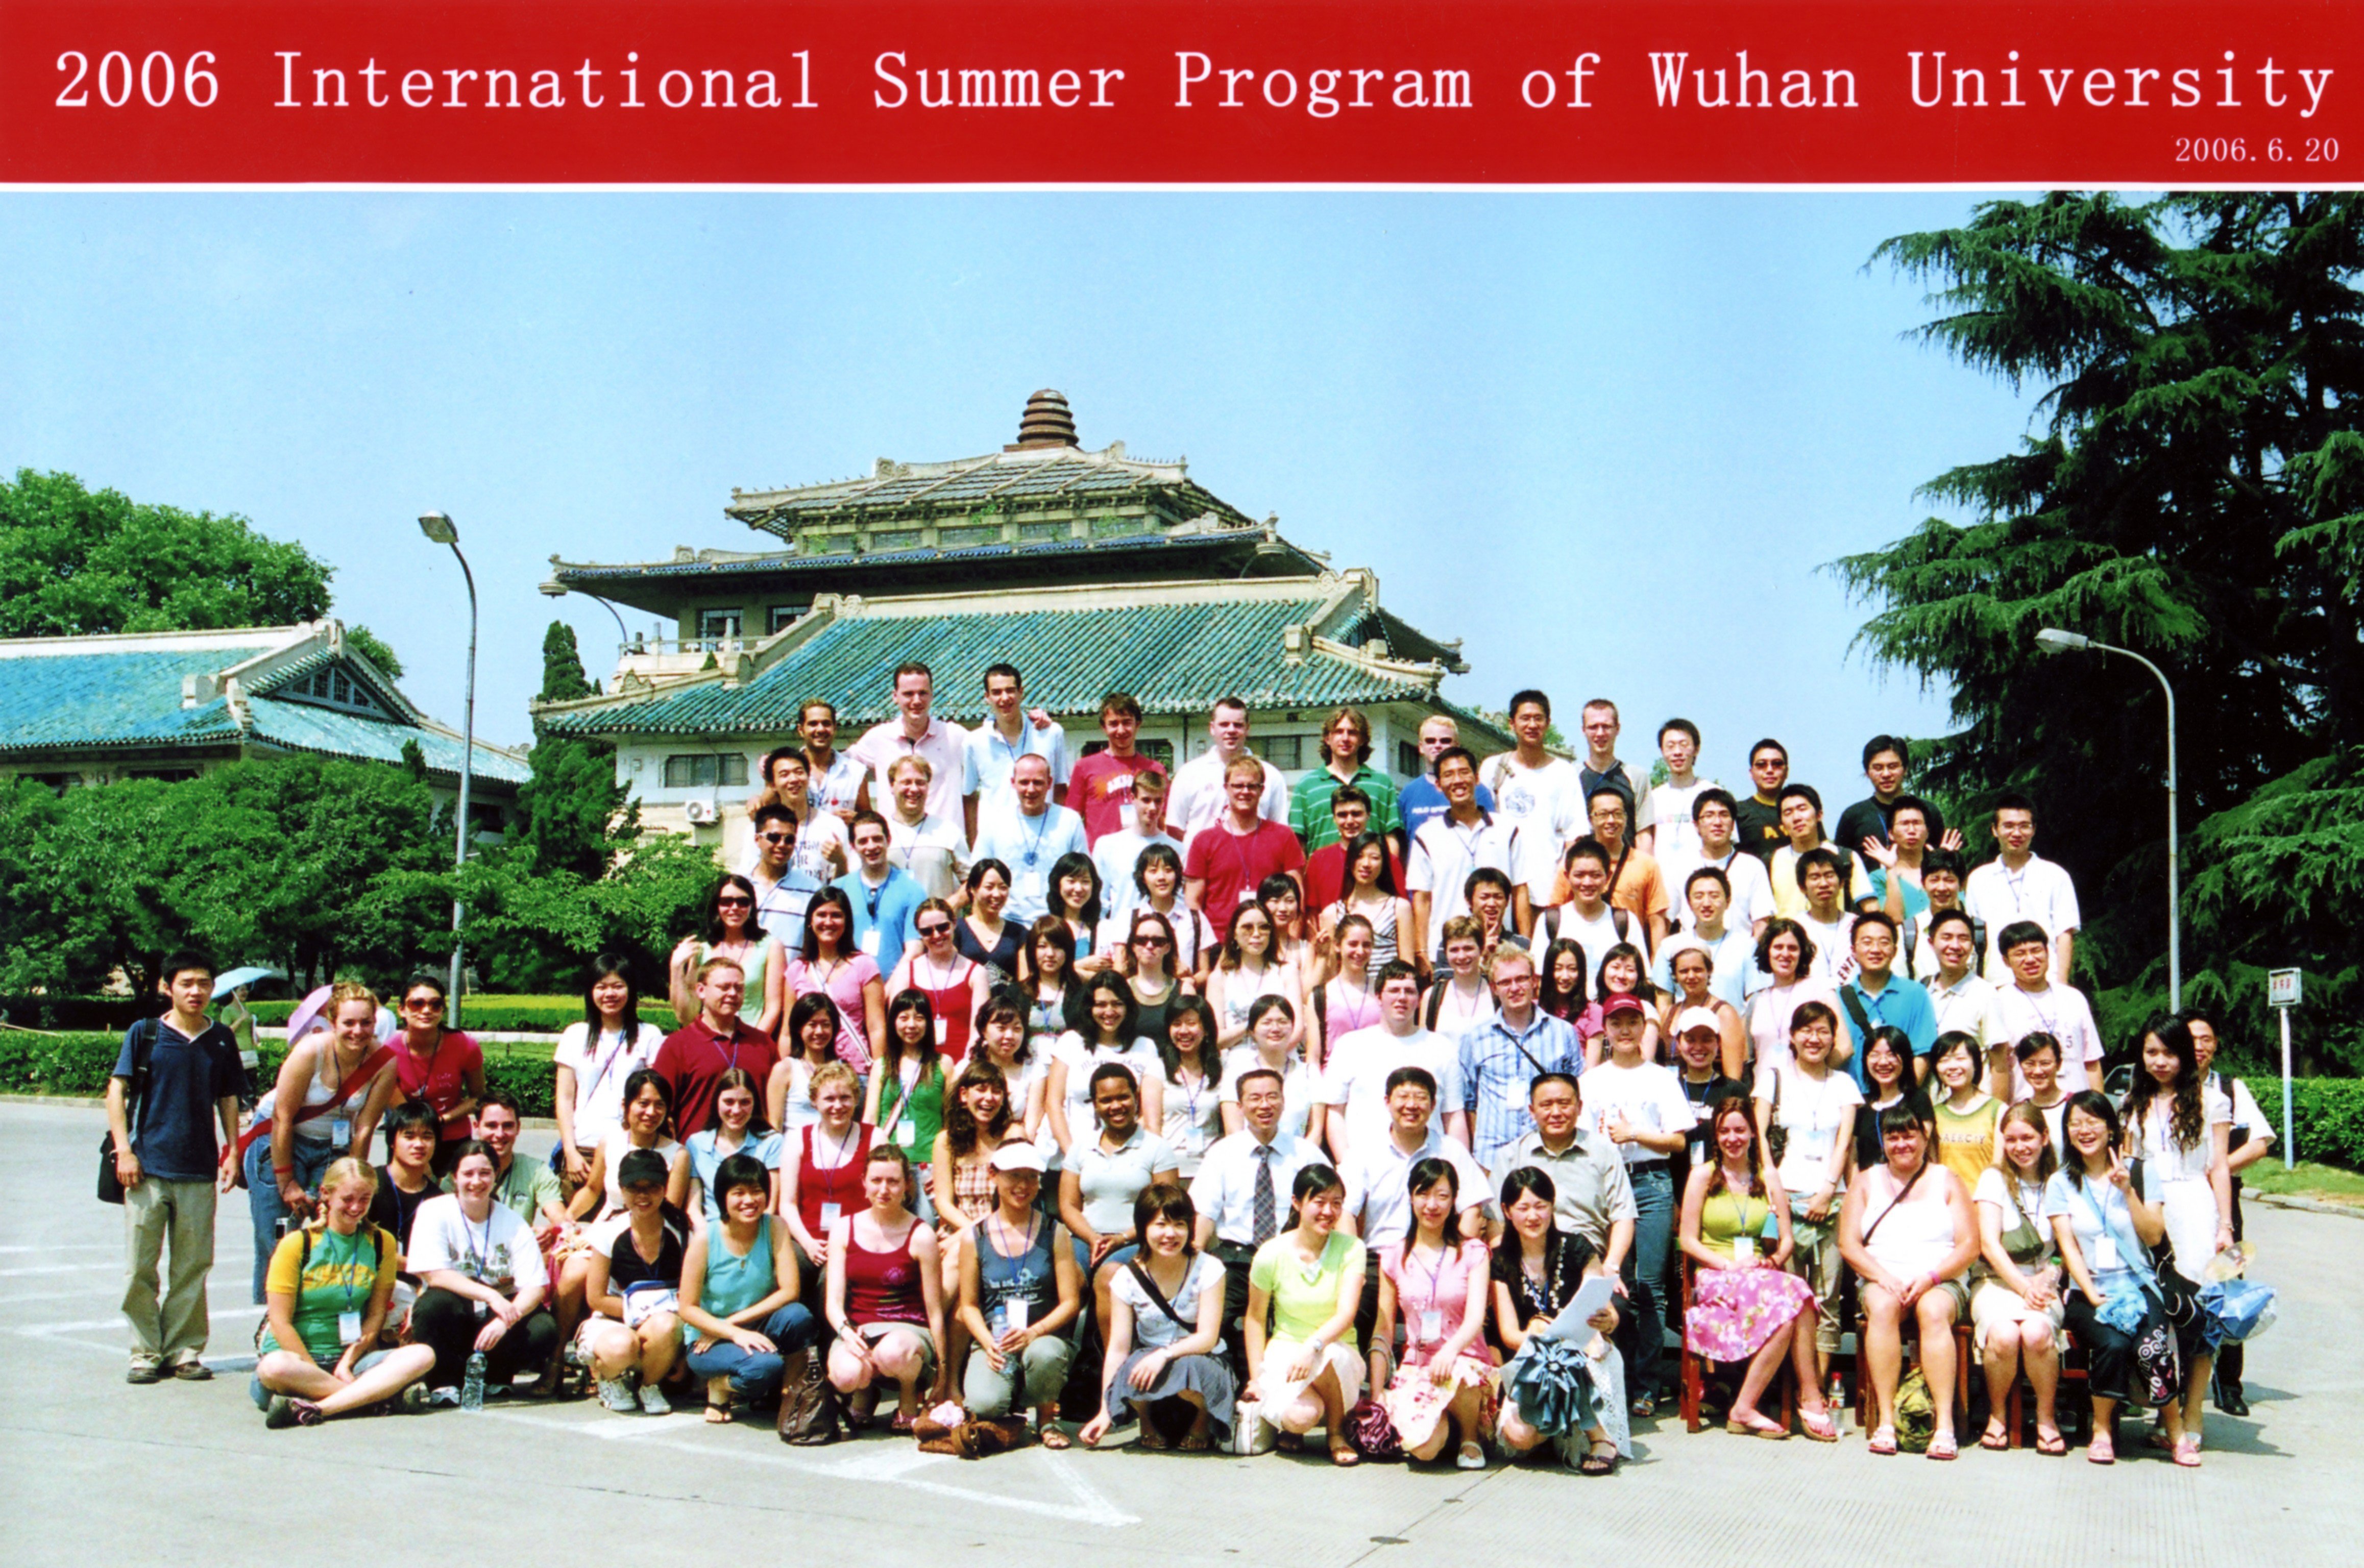 A large group of people is posing for a photo outdoors, smiling, in front of traditional Chinese architecture. Text: '2006 International Summer Program of Wuhan University 2006.6.20'.